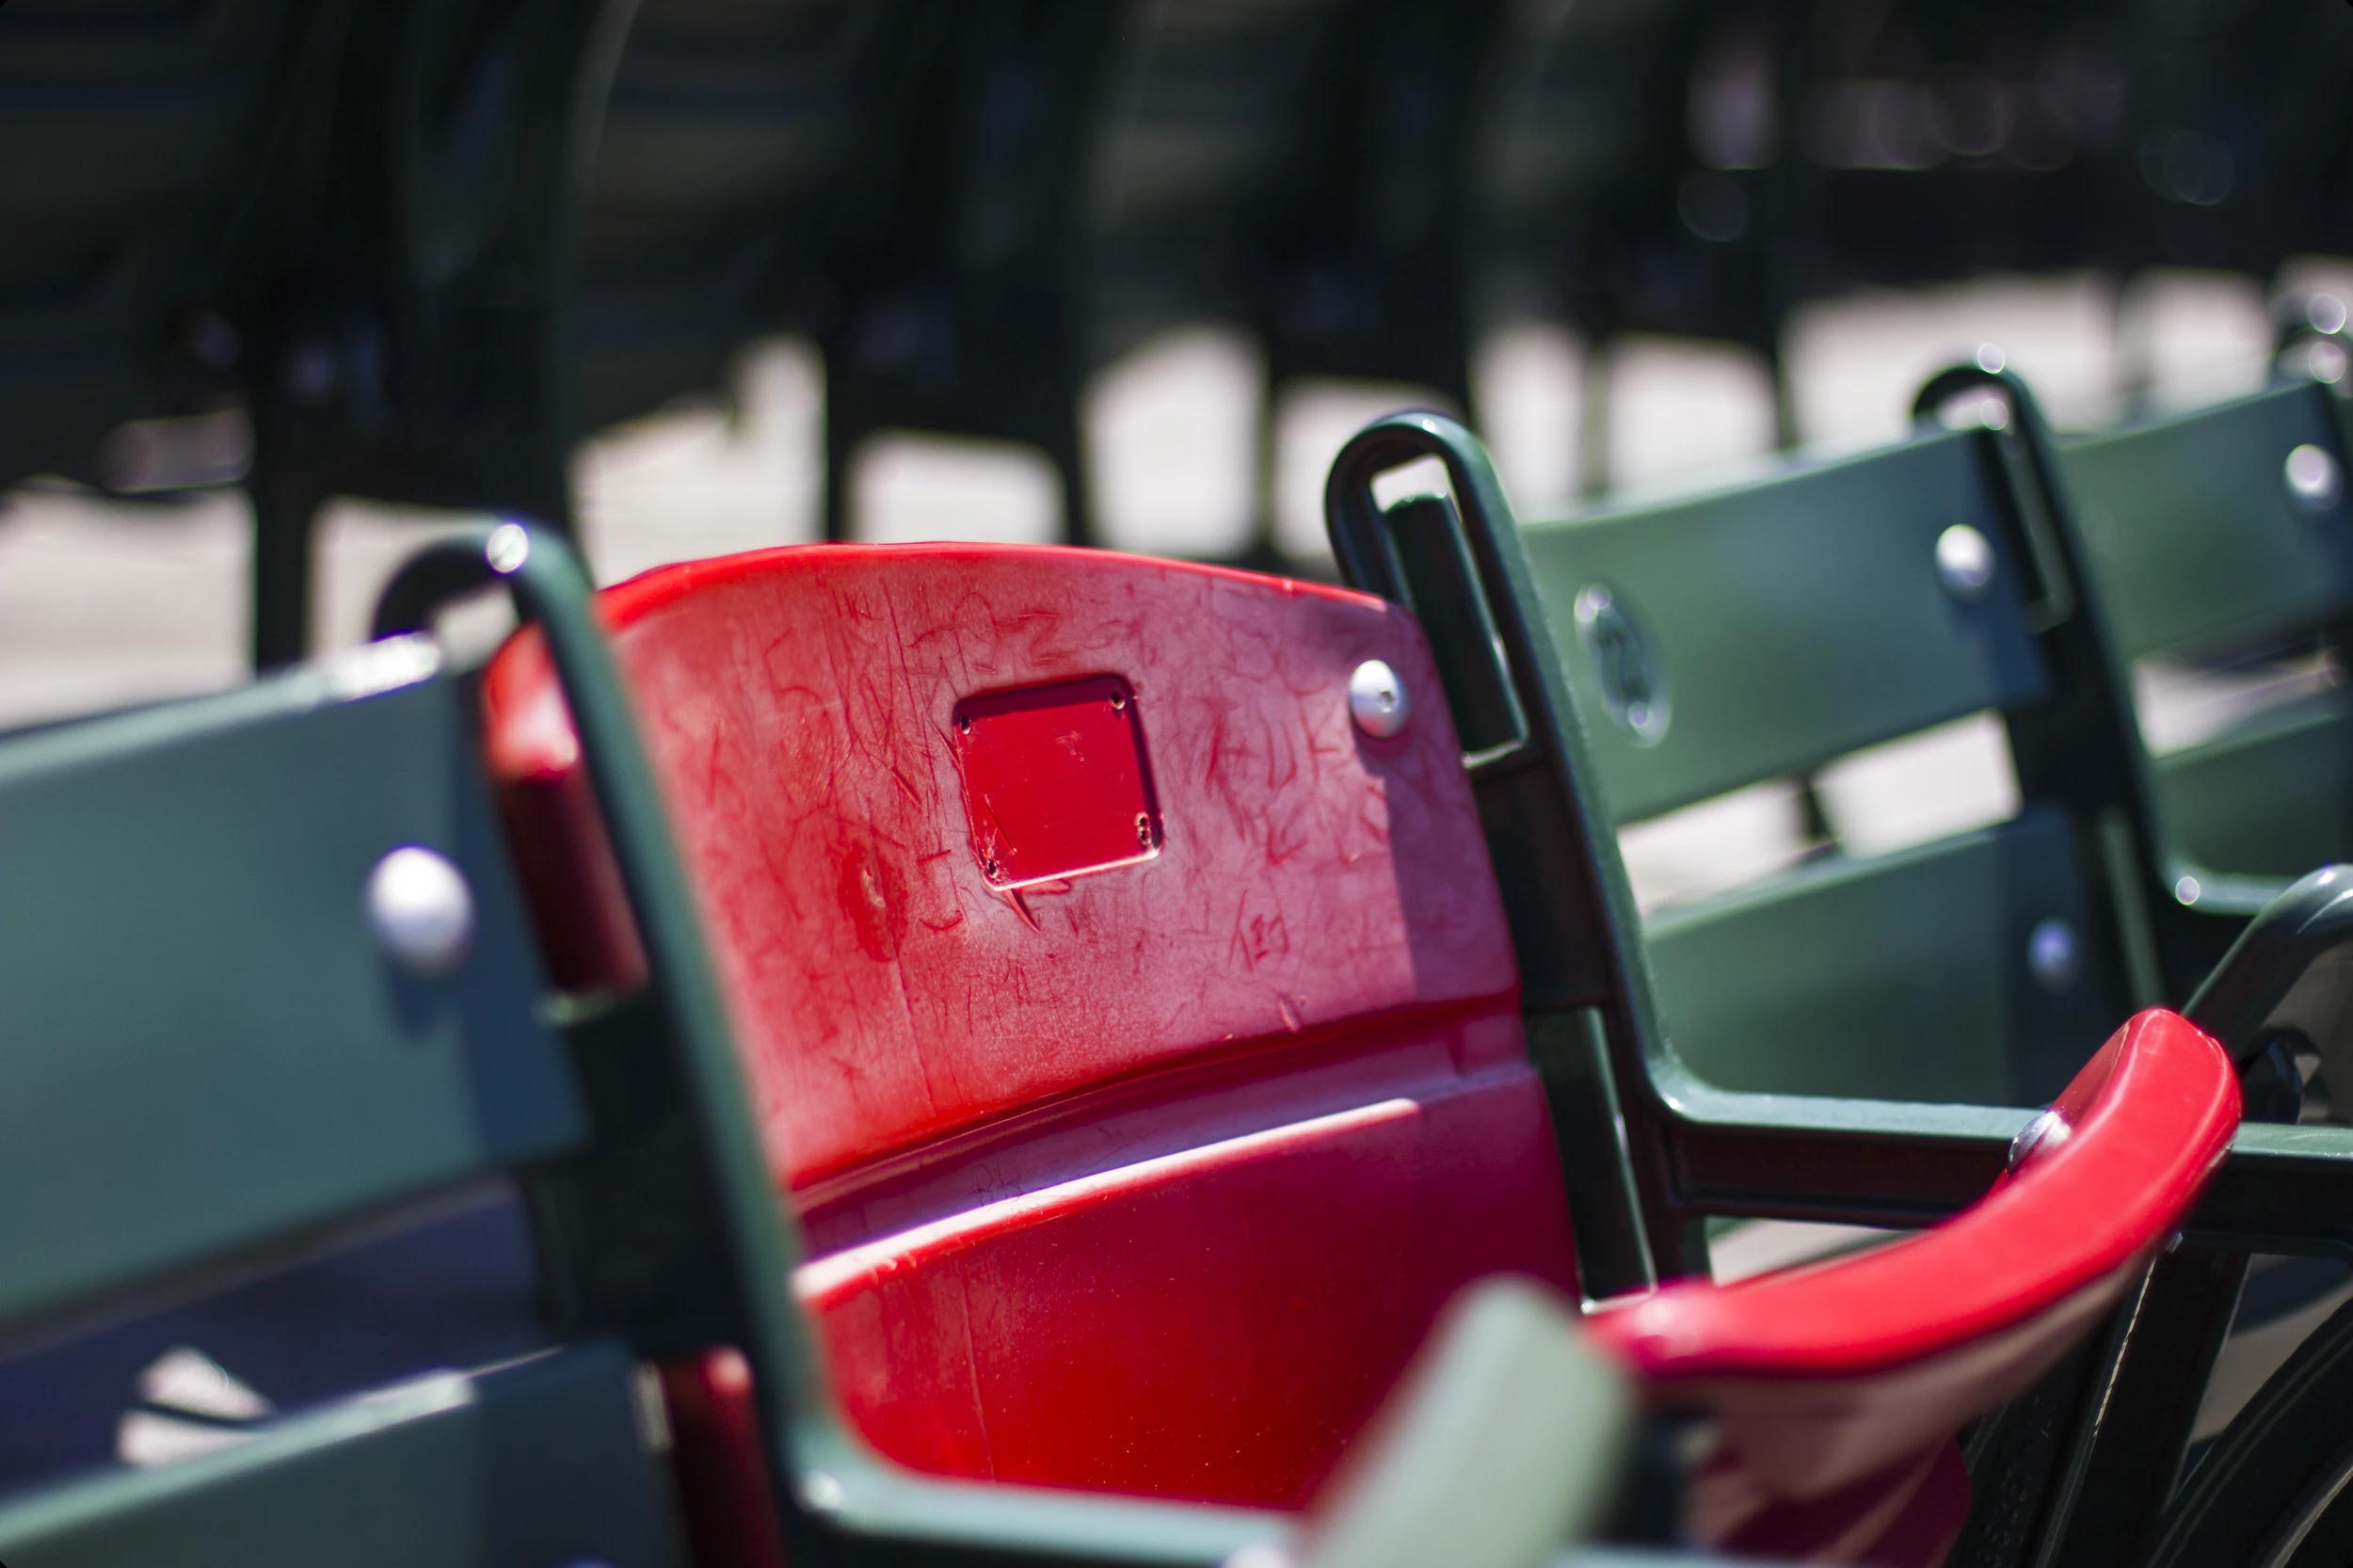 Fenway Park Original Seats Boston Red Sox Oldest Seats in 